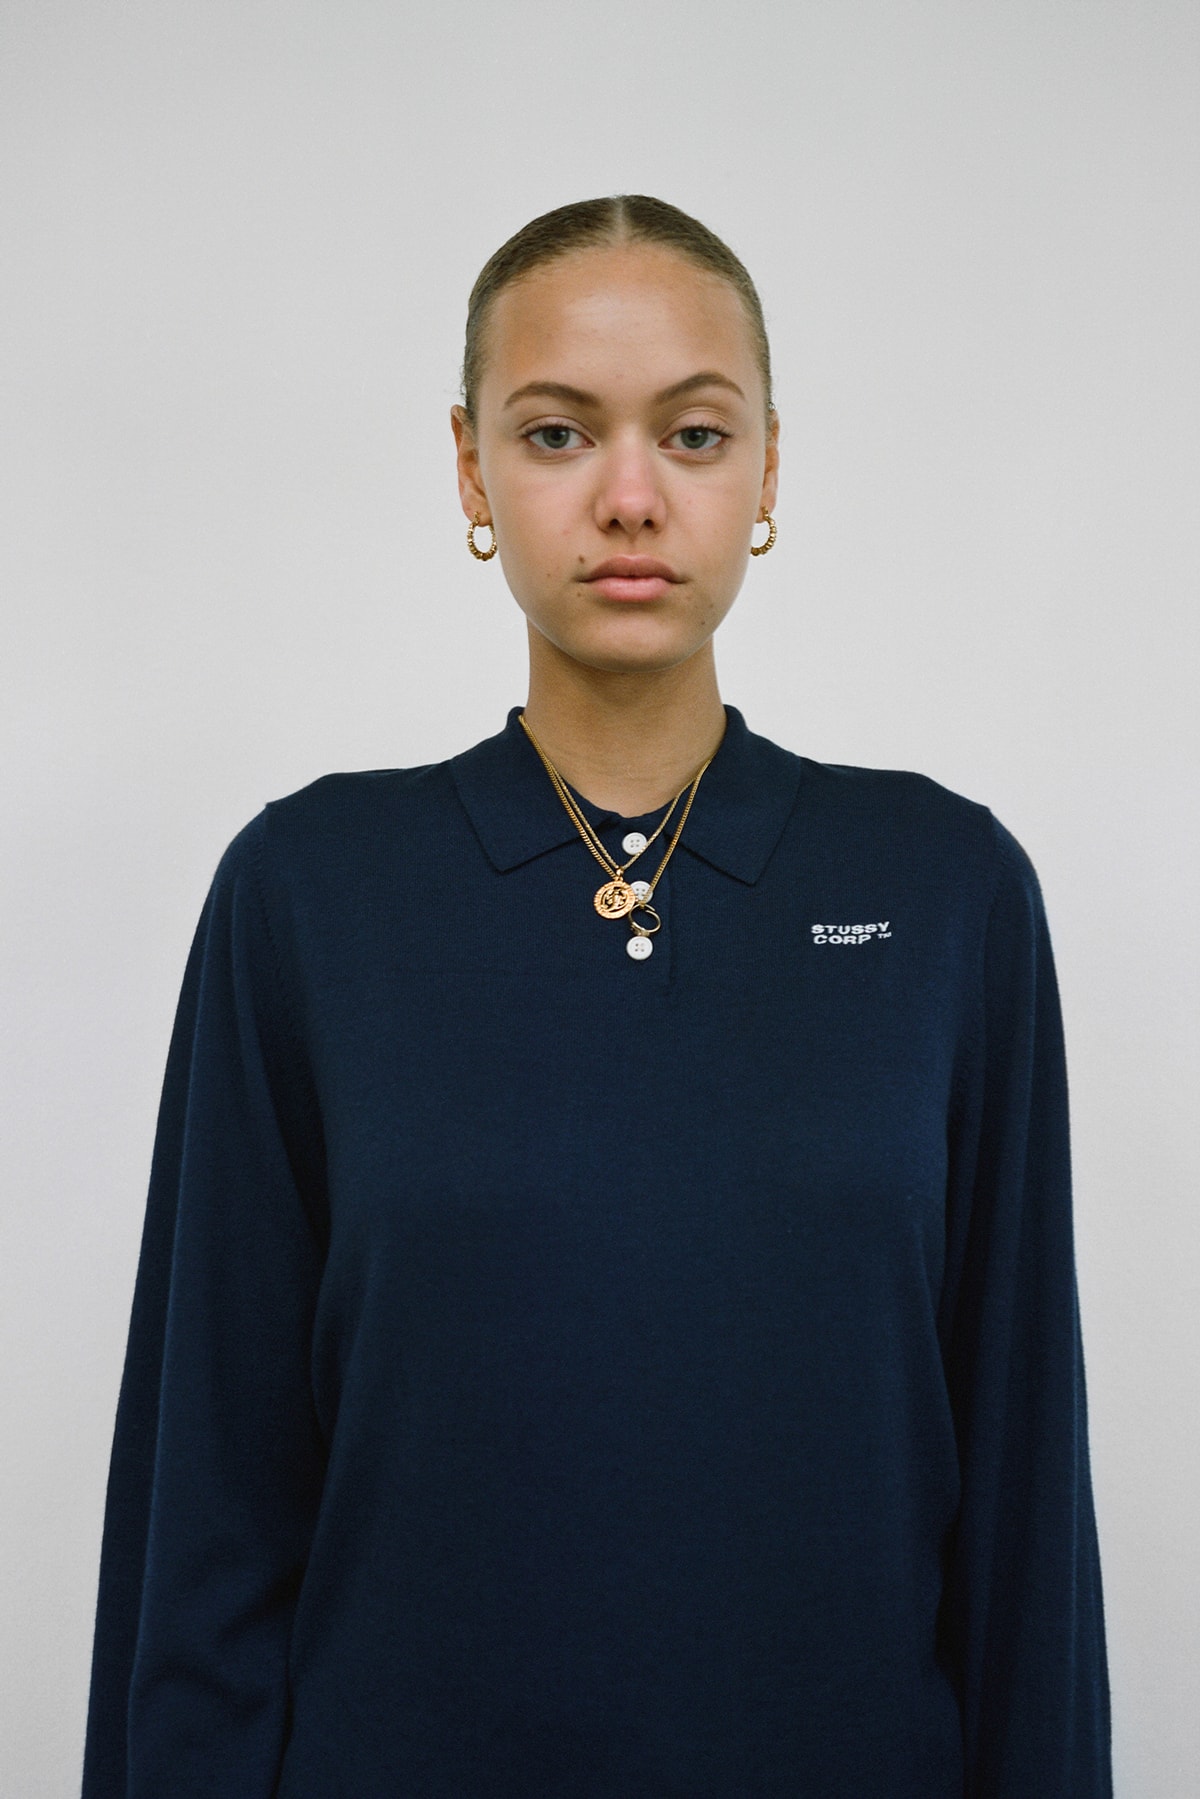 Stussy Women's Holiday 2018 Collection Lookbook Logo Top Blue